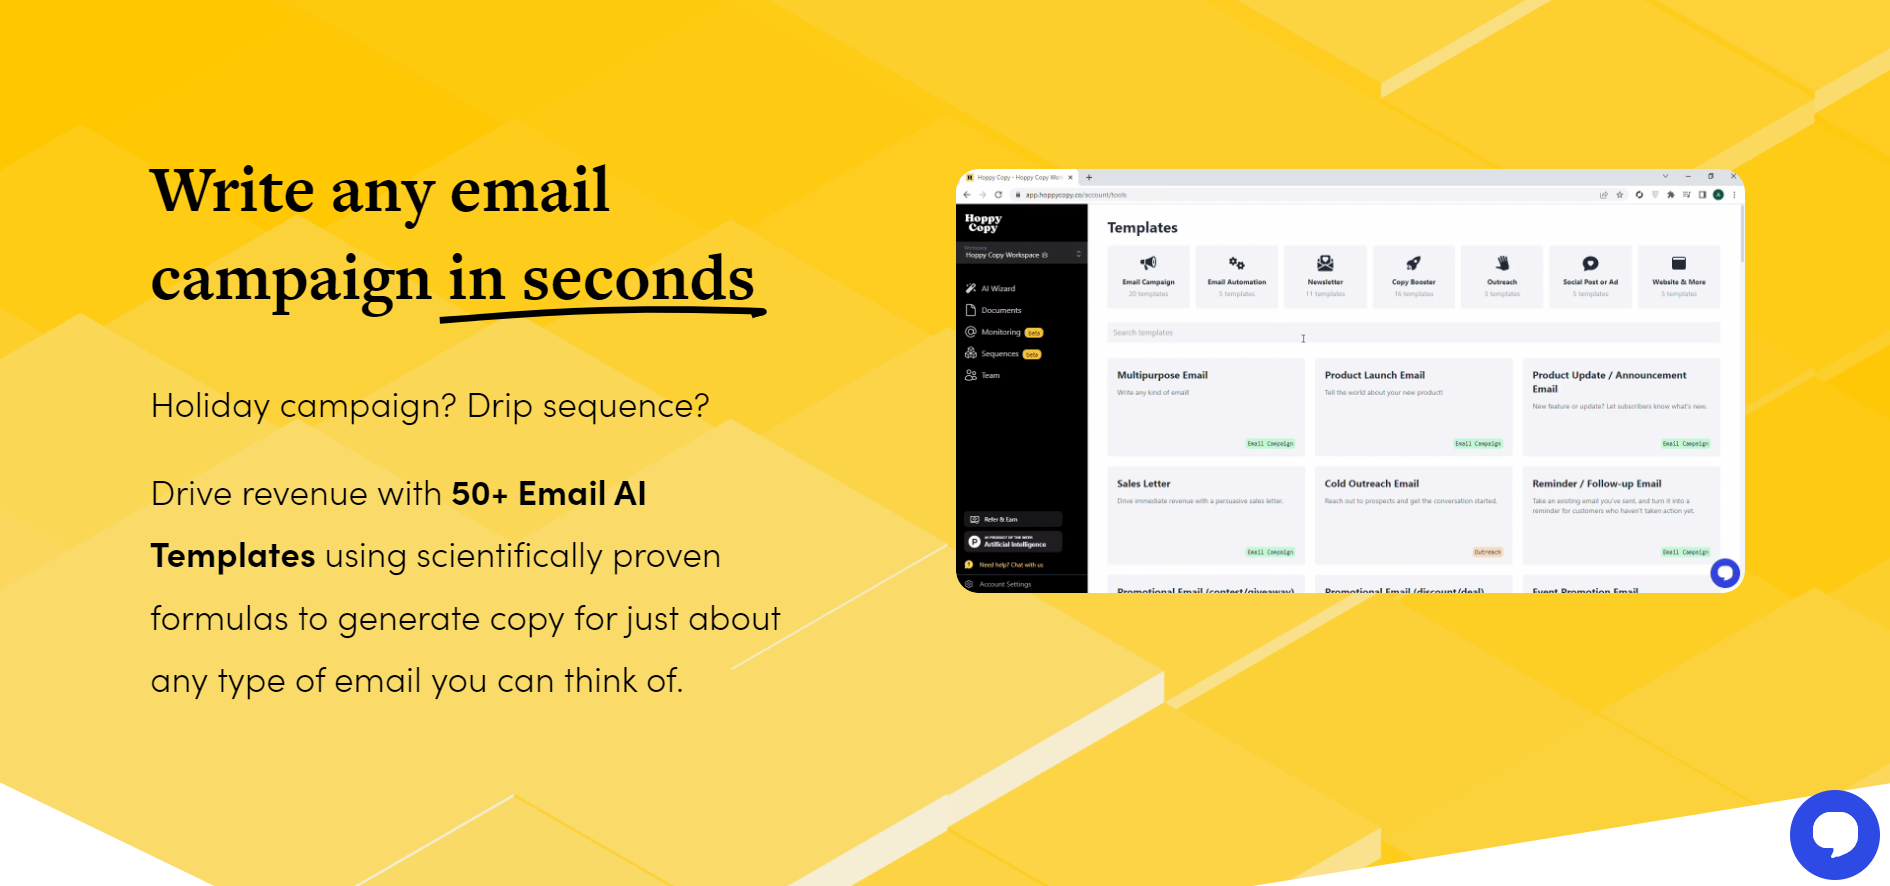 Landing Page - Write any email campaign in seconds